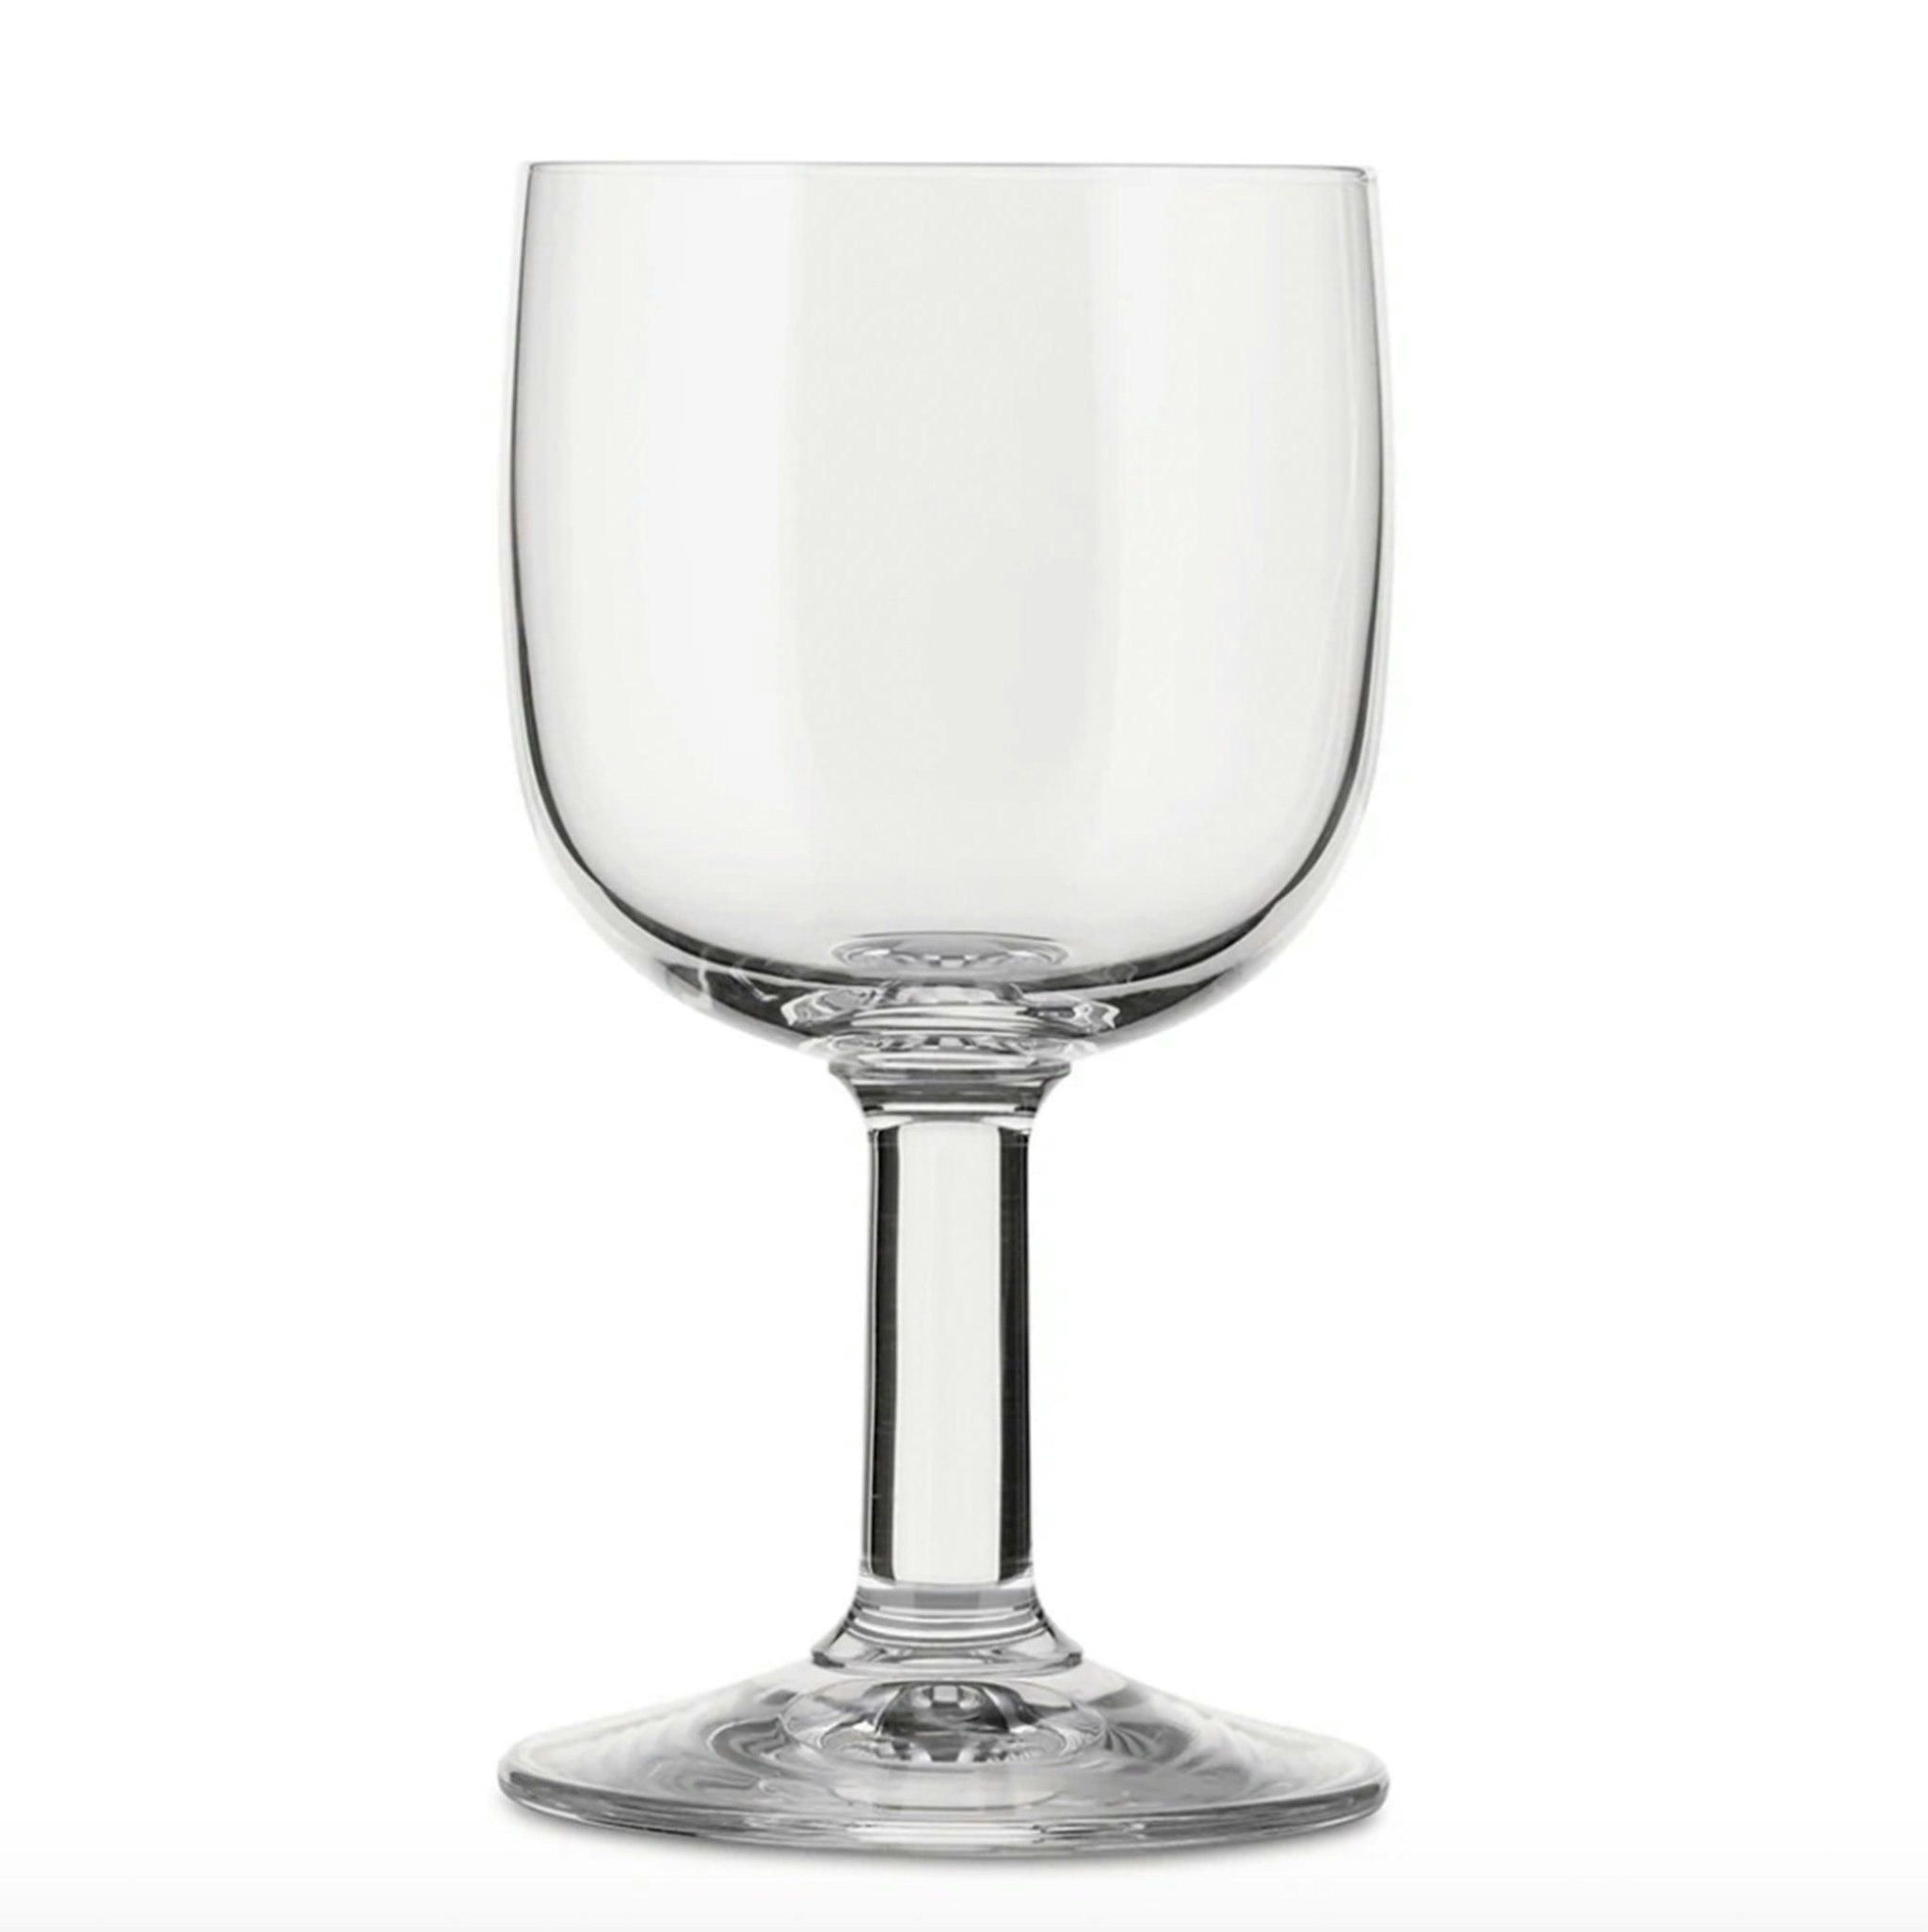 Goblet by Alessi